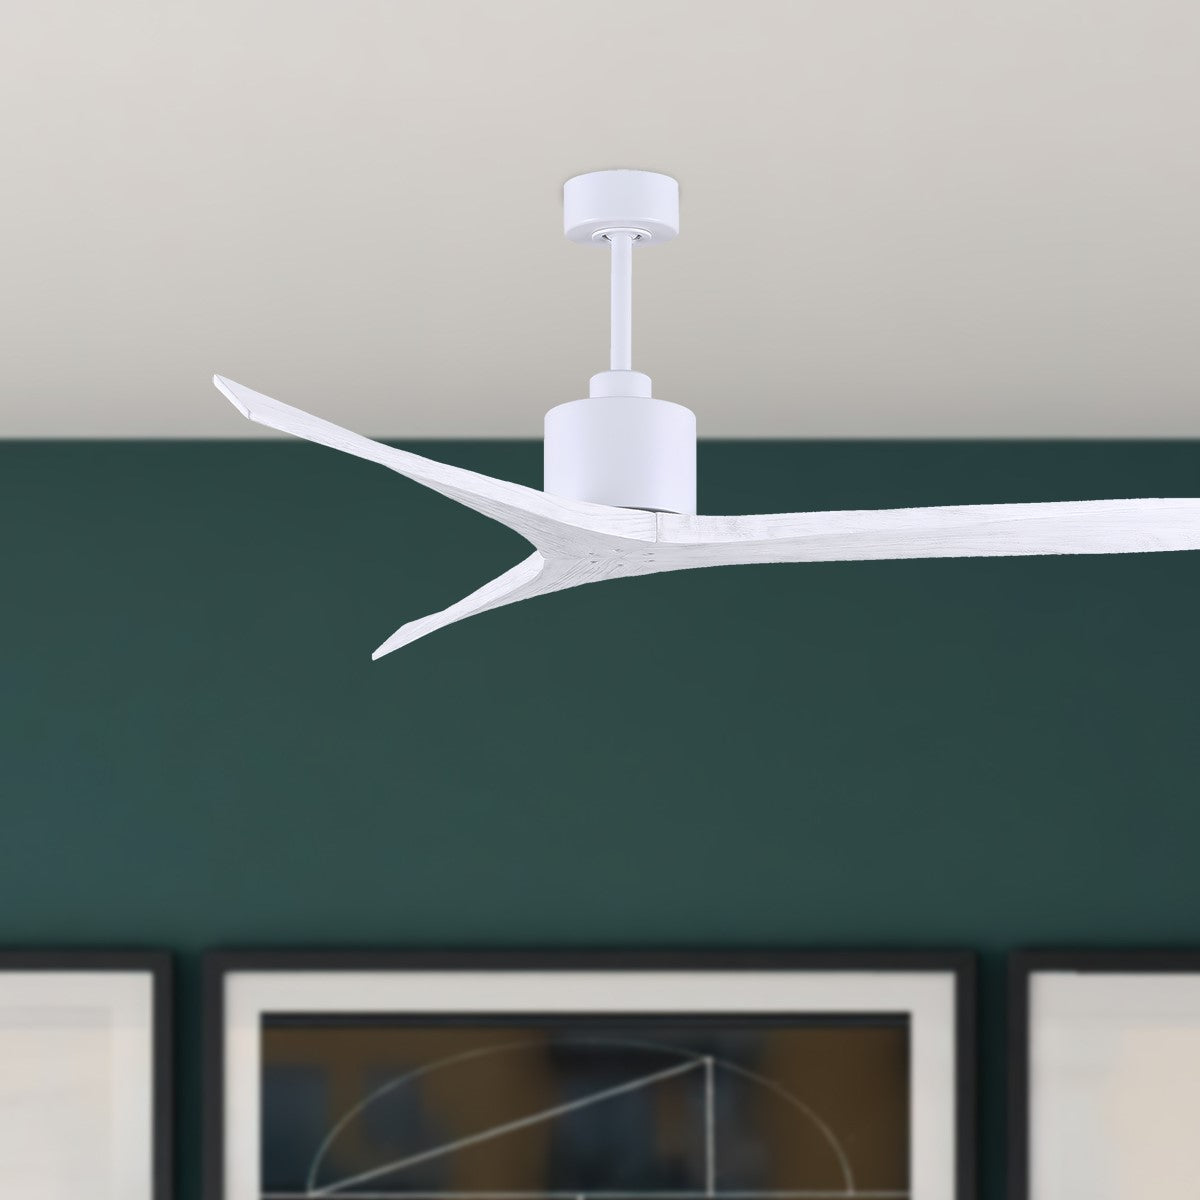 Mollywood 60 Inch Propeller Outdoor Ceiling Fan With Remote And Wall Control